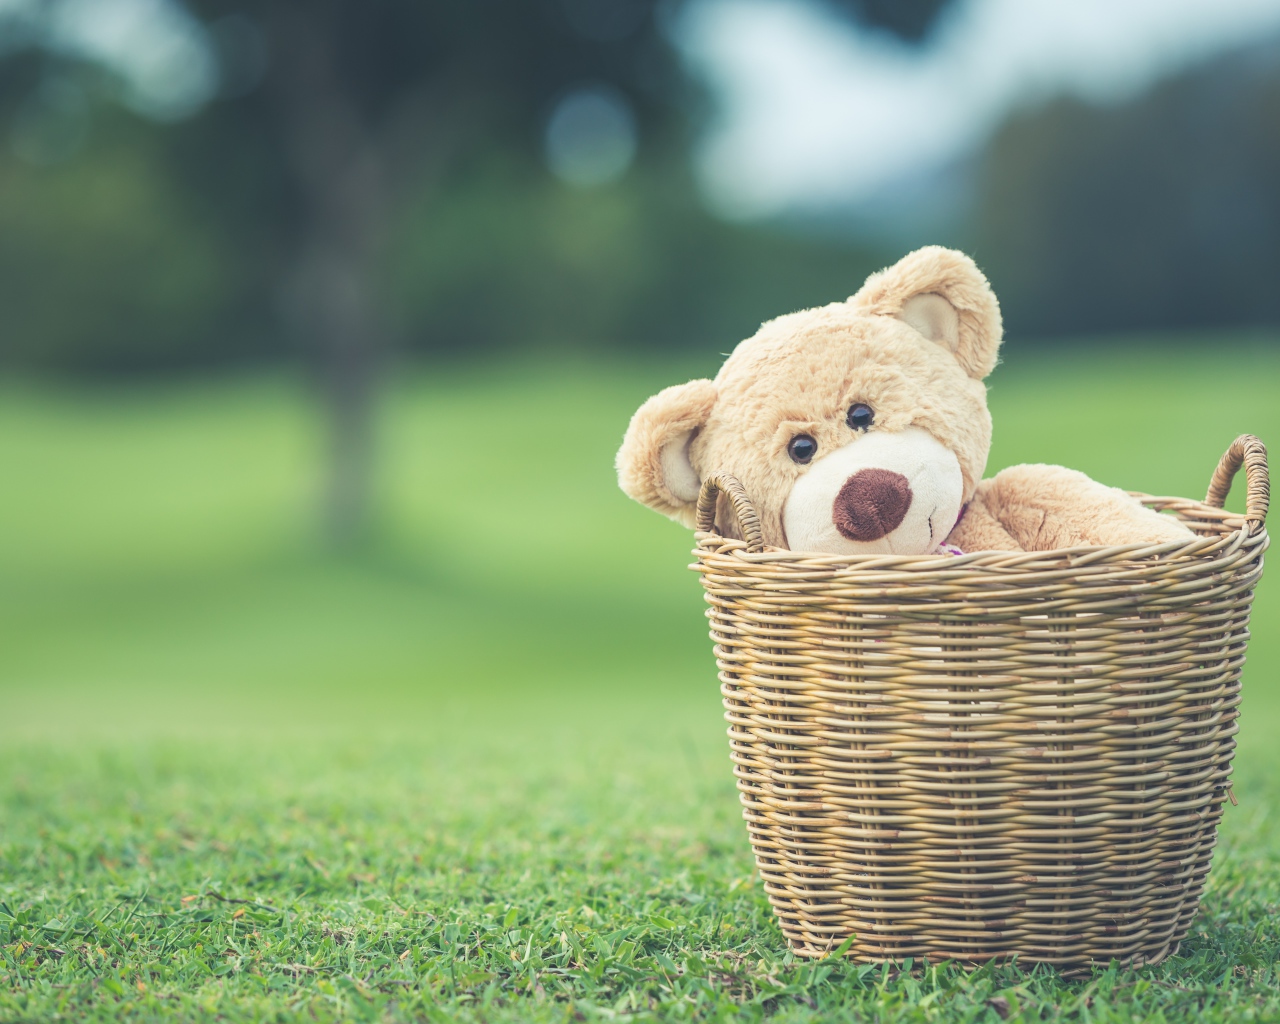 Teddy bear in the basket on the green grass